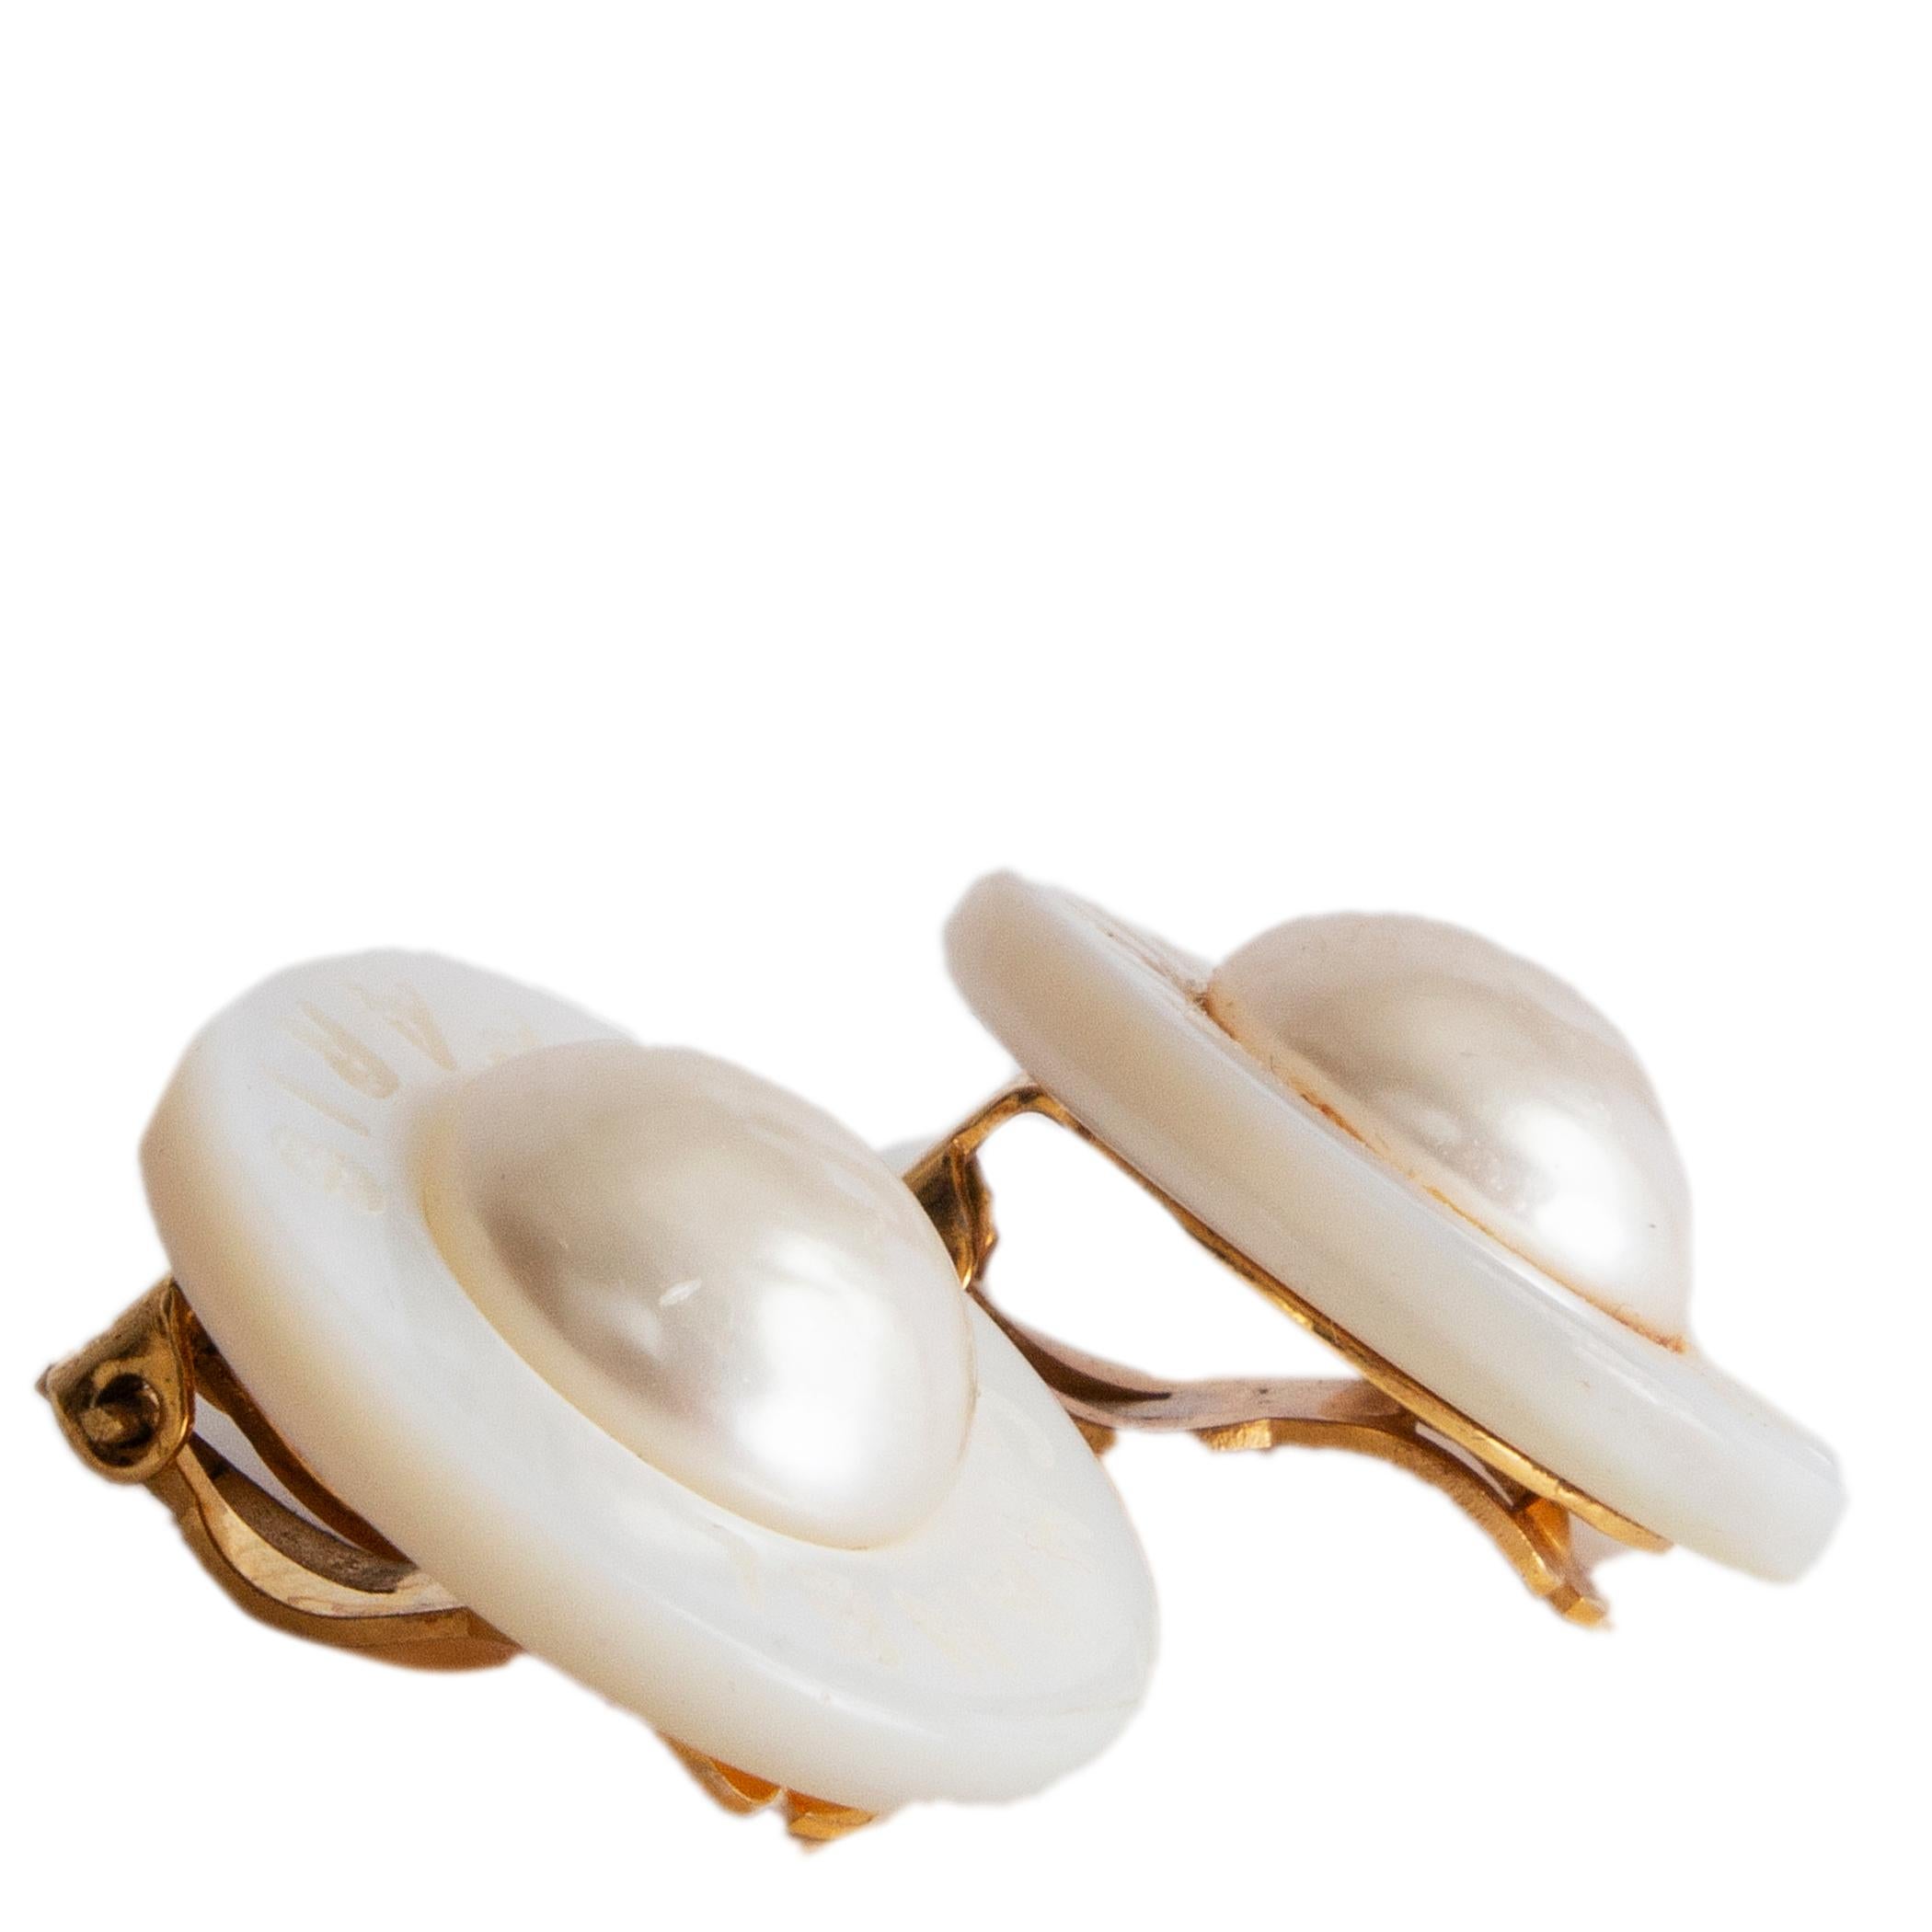 Chanel Vintage round clip earrings in off-white mother of pearl. Have been worn with some faint glue stain on one earring. Overall in very good vintage condition. 

Width 2.5cm (1in)
Height 2.5cm (1in)
Depth 1cm (0.4in)
